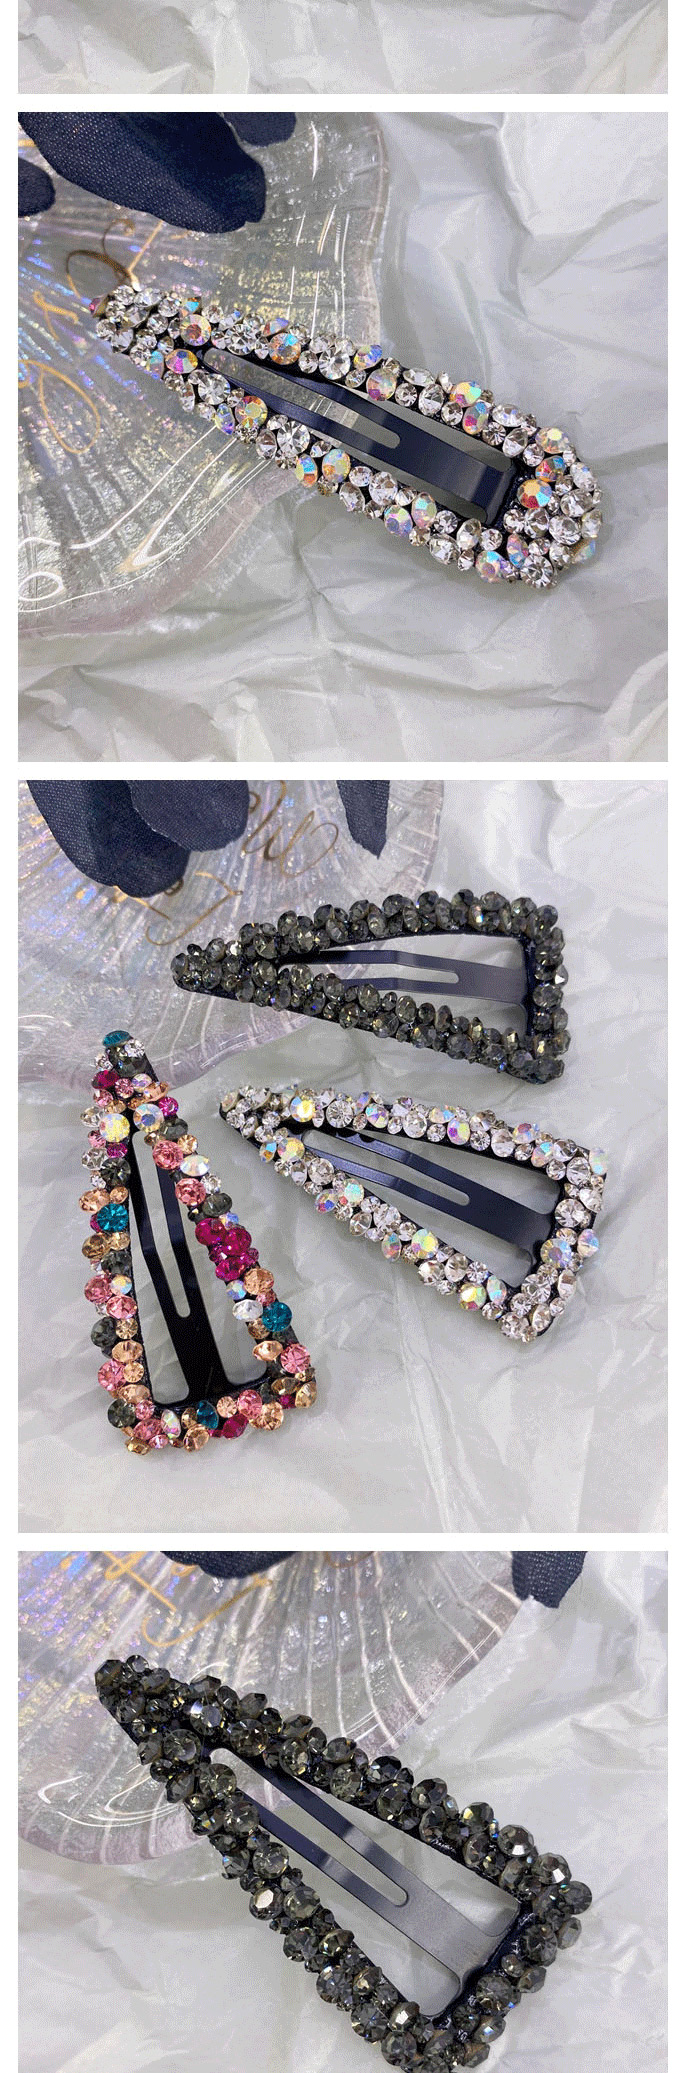 Fashion Fang Meihong Diamond-shaped Seamless Crystal Hollow Water Drop Square Triangle Hairpin,Hairpins